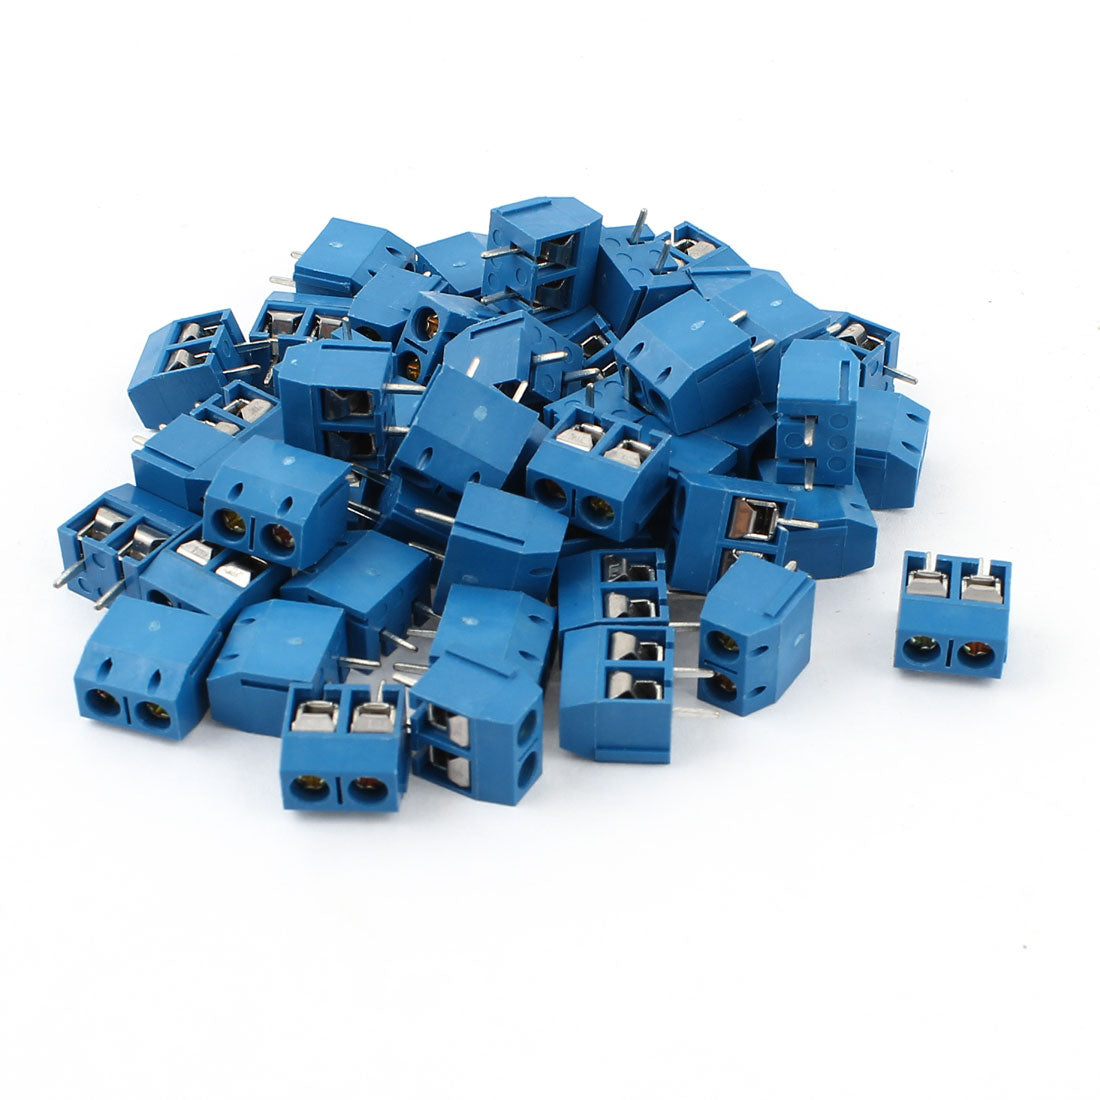 uxcell Uxcell 50 Pcs 2 Poles 5mm Pitch PCB Mount Screw Terminal Block AC 300V 10A AWG12-24 Blue